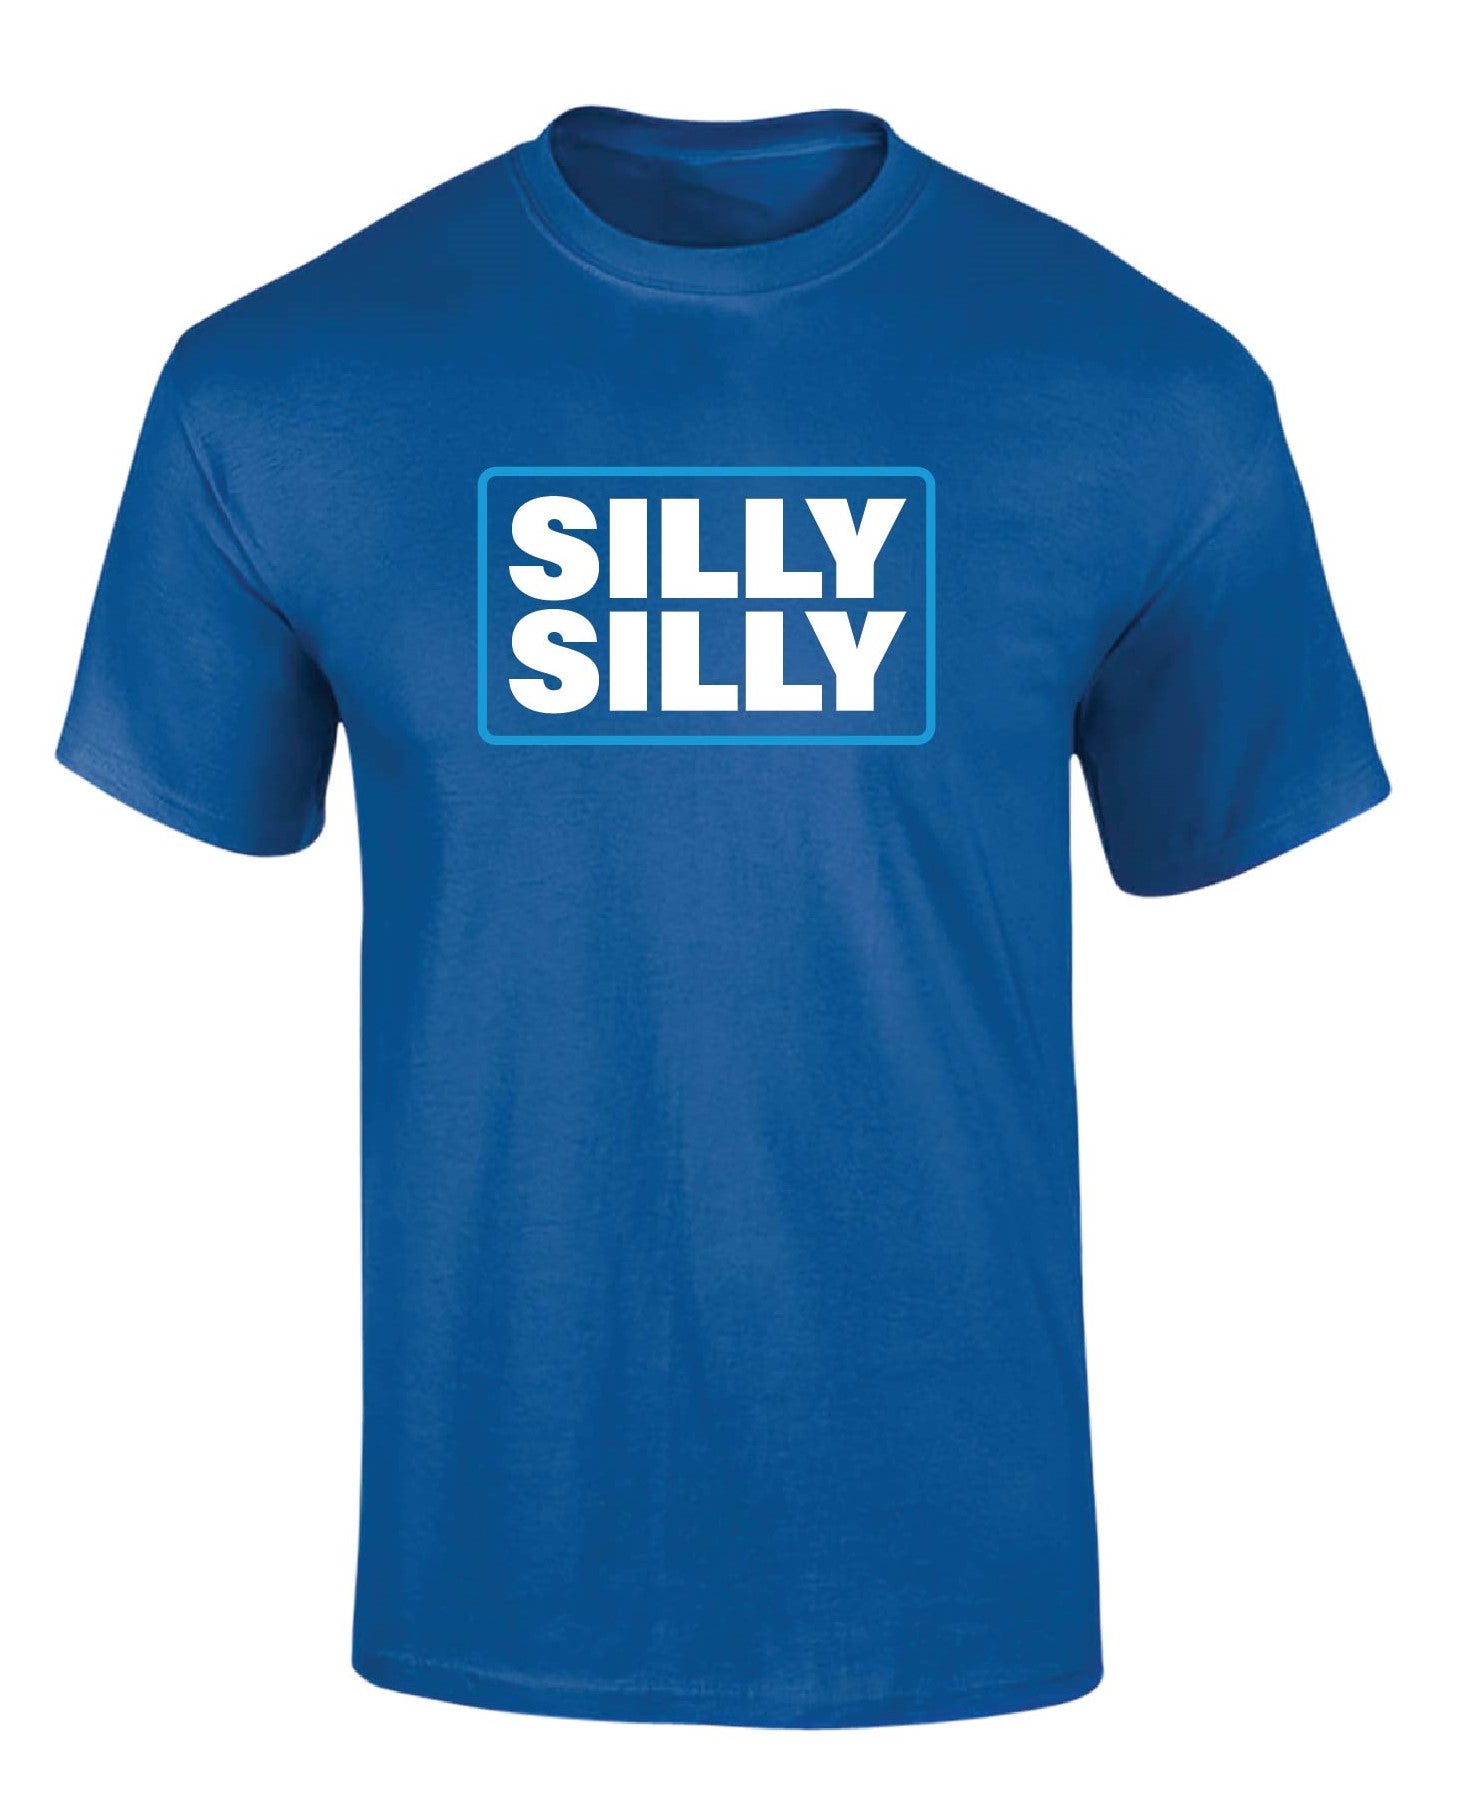 Silly Silly T-Shirt-0